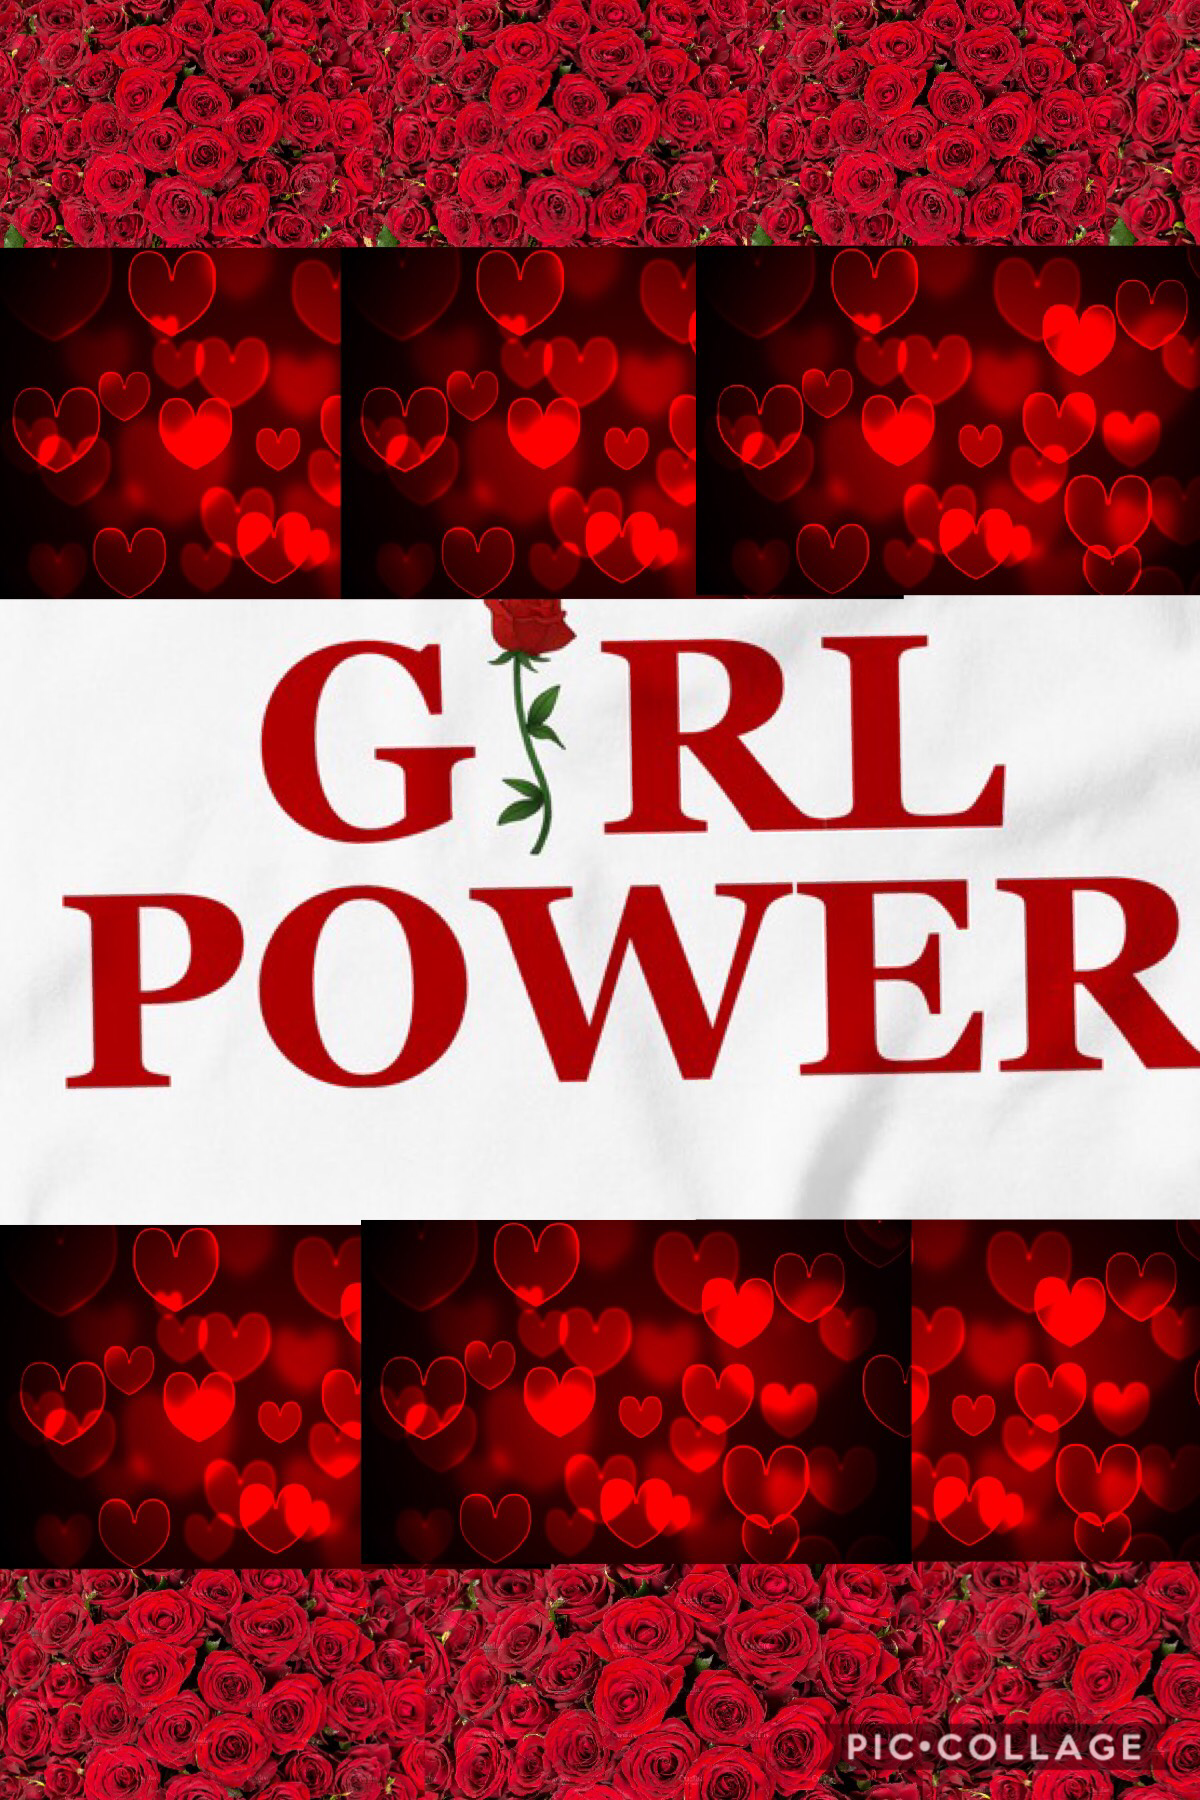 Girl power stays strong!
💝💝💝💝💝💝💝💝💝